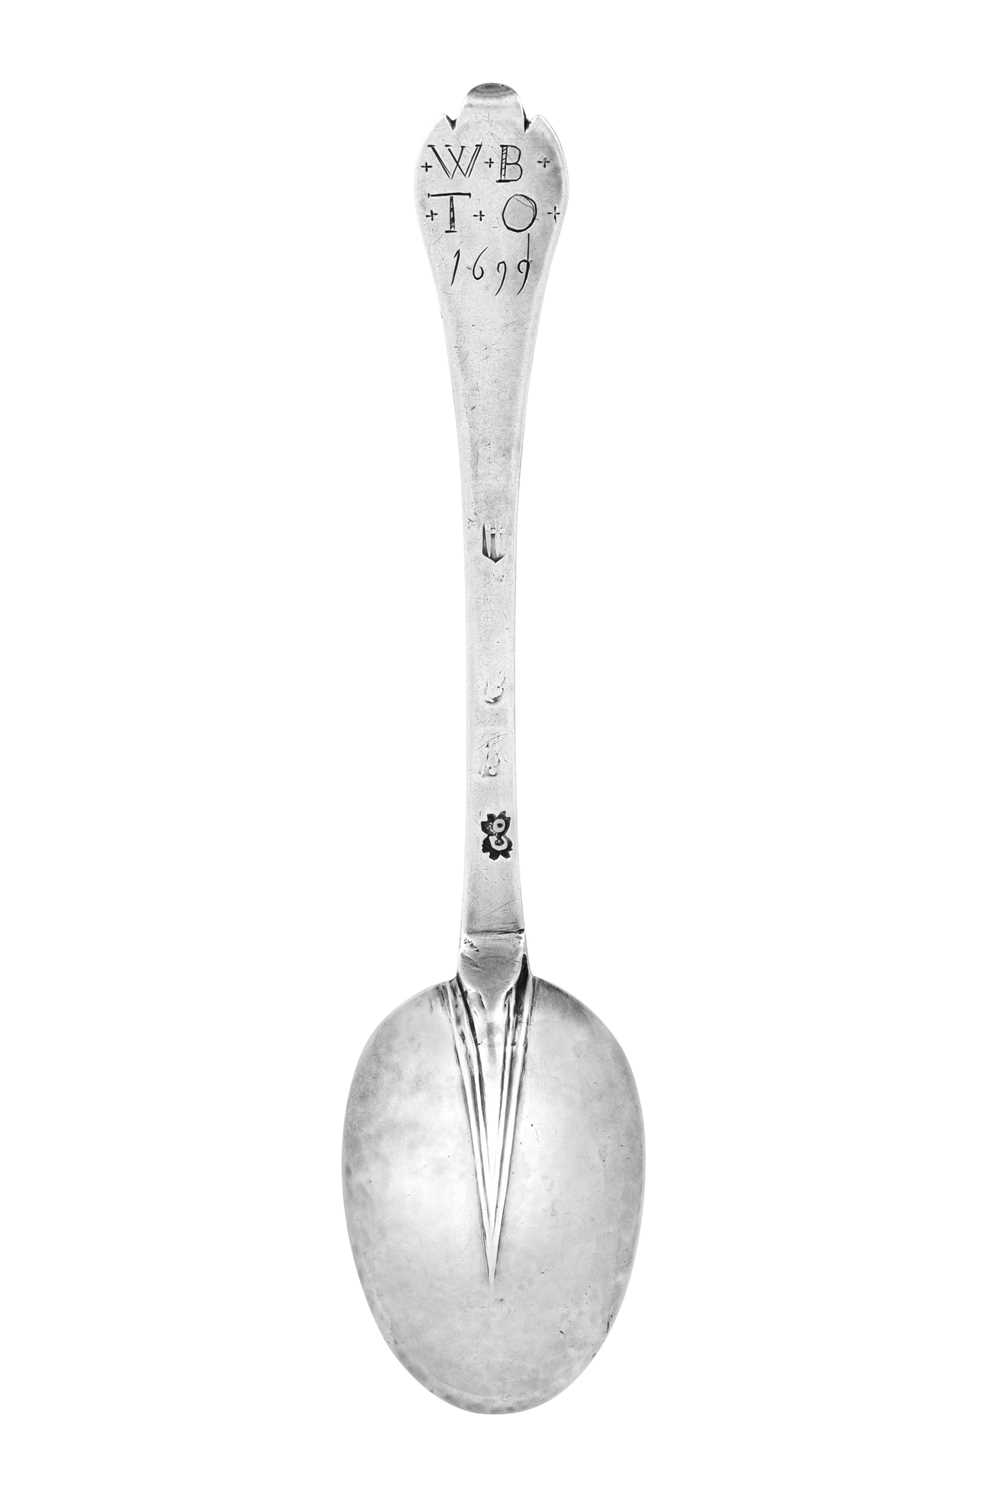 A William III Silver Trefid-Spoon, by Lawrence Coles, London, 1701